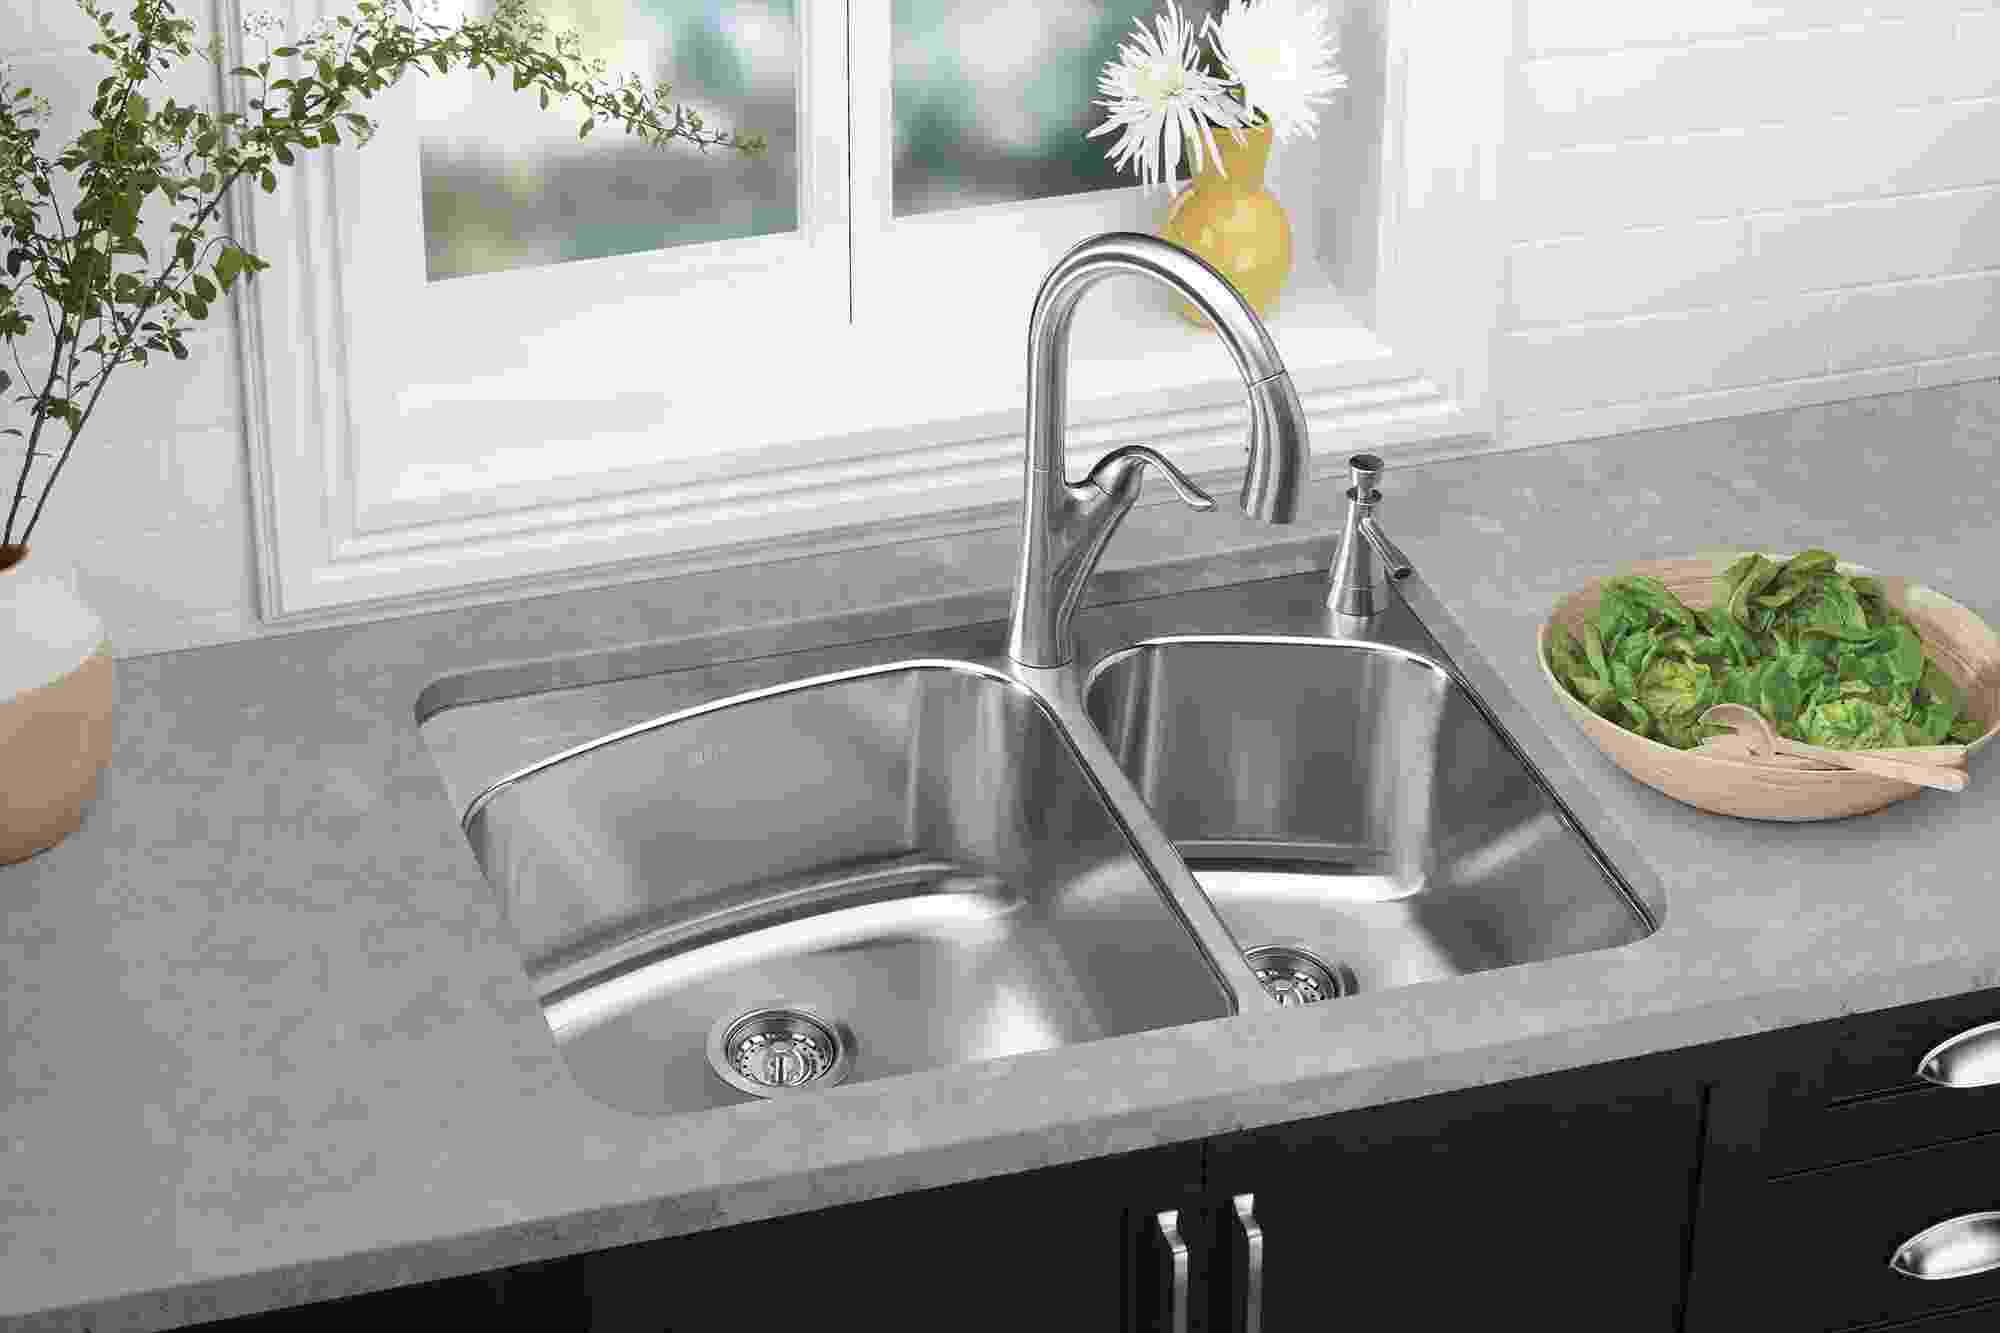 How To Install And Undermount Kitchen Sink